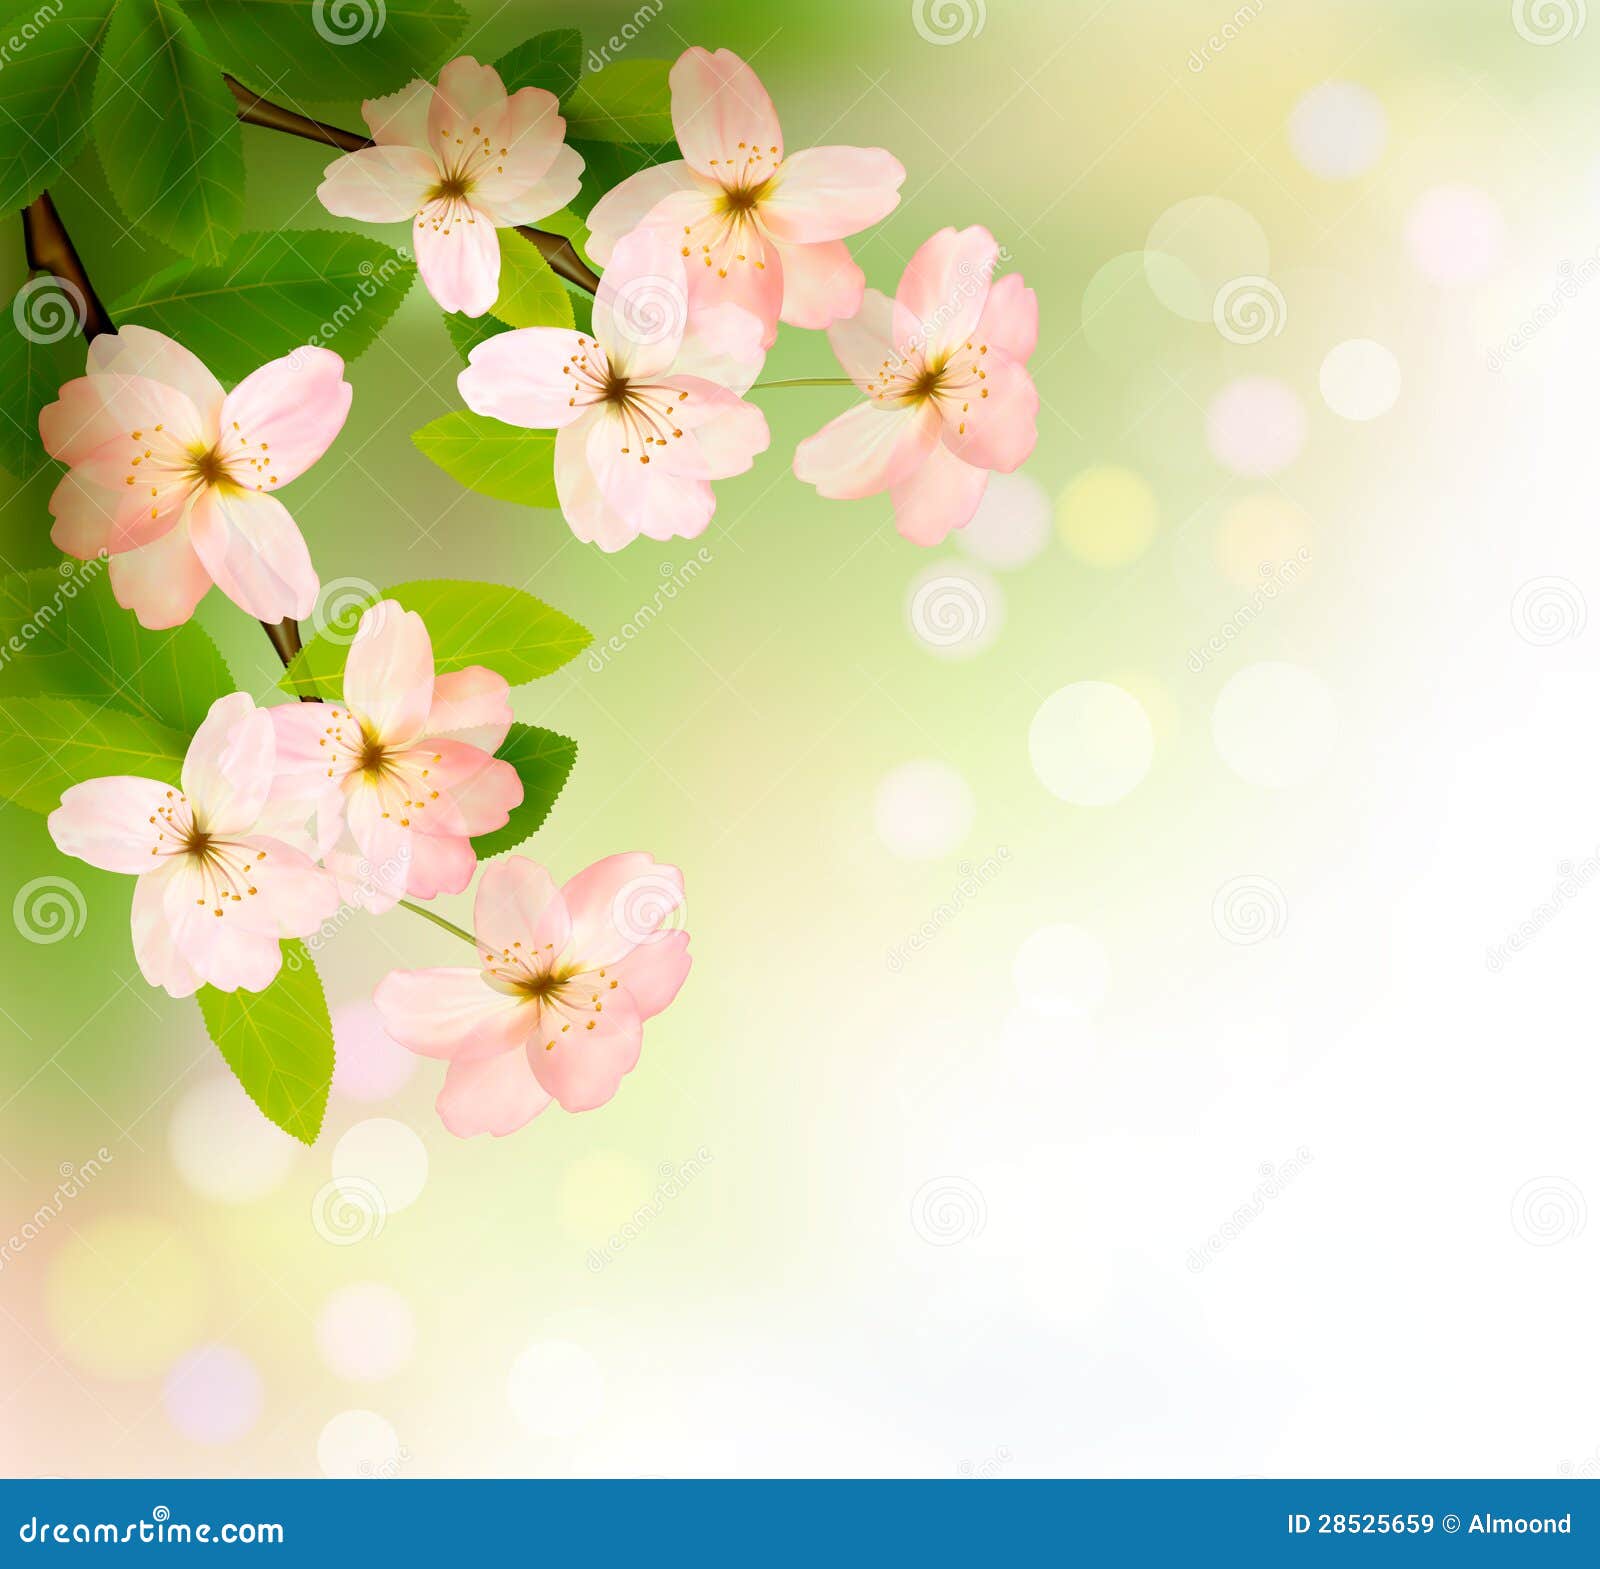 spring background with blossoming tree brunch